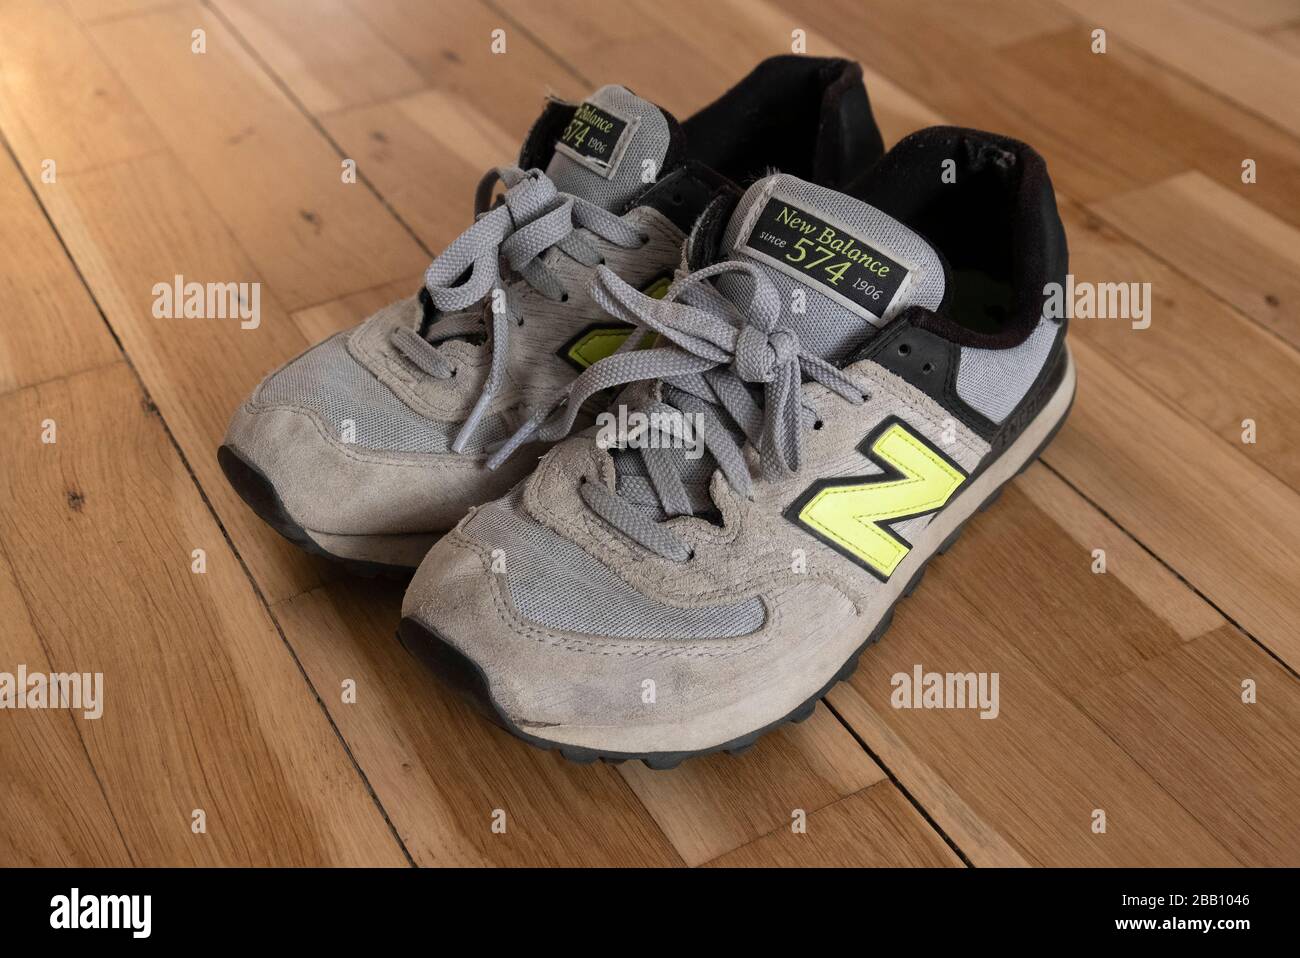 New Balance Trainers High Resolution Stock Photography and Images - Alamy